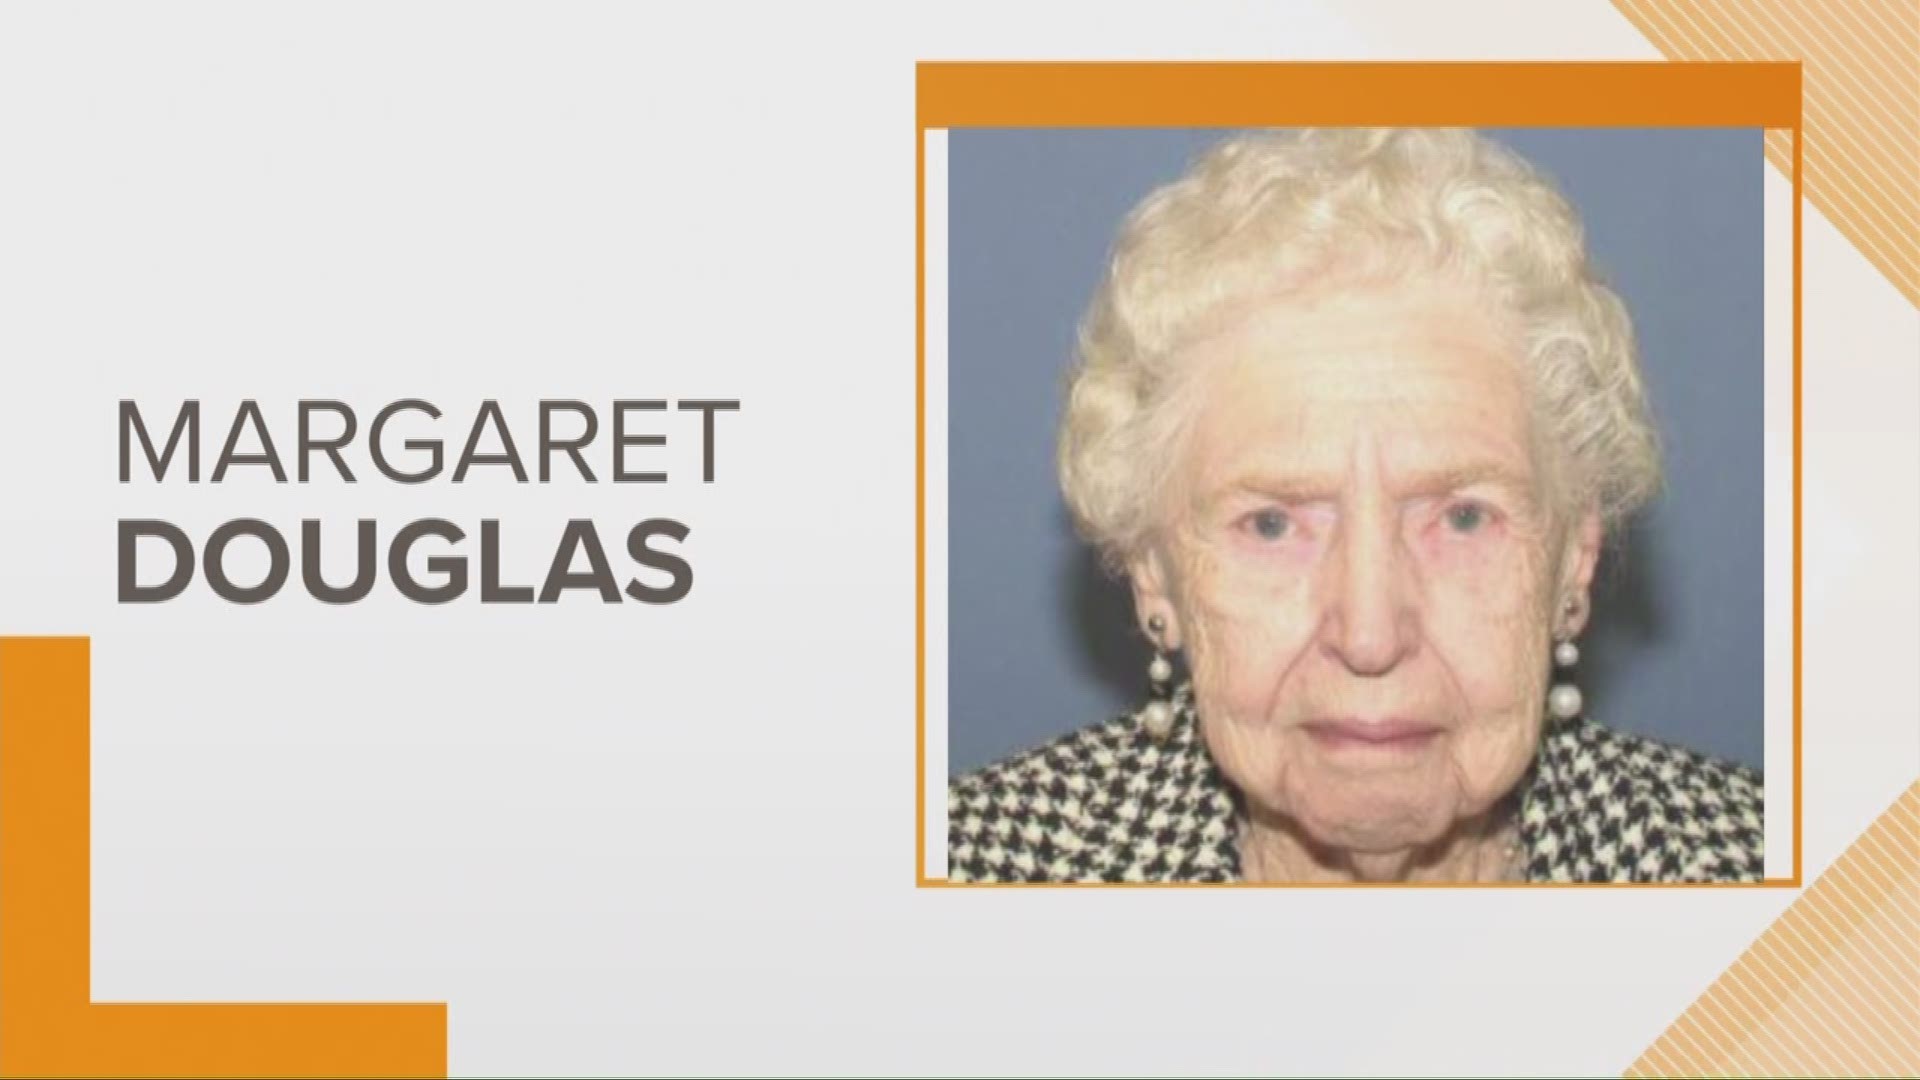 April 10, 2018: As authorities search for a missing 98-year-old Wadsworth woman, WKYC has learned officials with the Bureau of Criminal Investigation were at her home overnight. Neighbors say investigators were at the home of 98-year-old Margaret Douglas